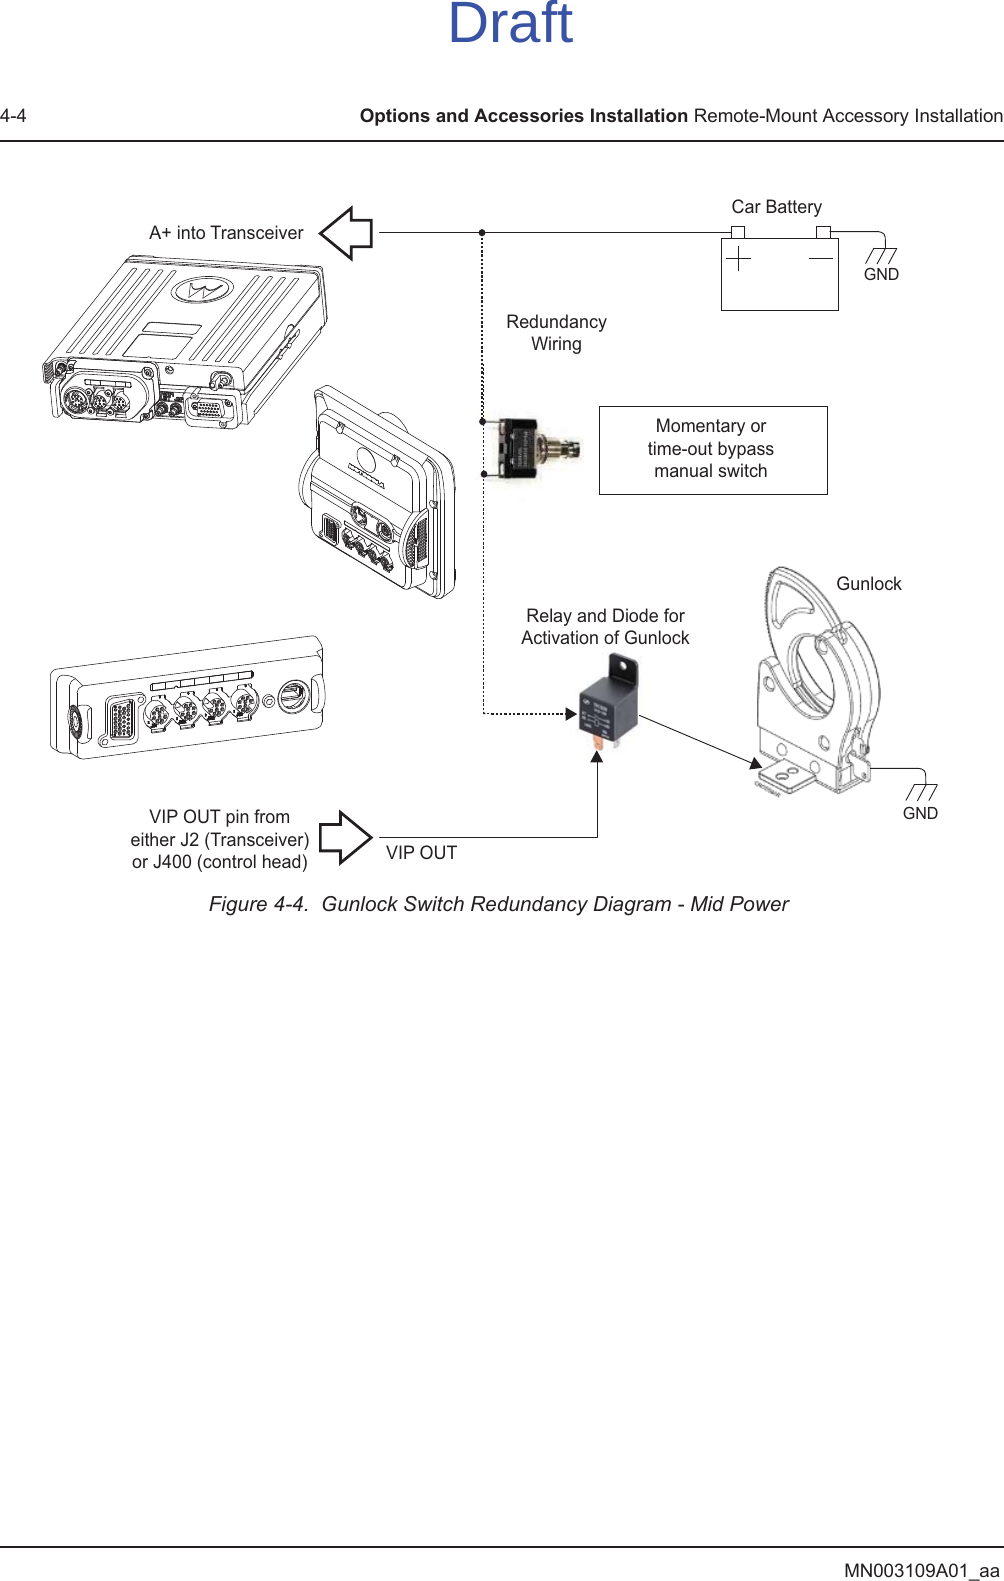 MN003109A01_aa4-4 Options and Accessories Installation Remote-Mount Accessory InstallationFigure 4-4.  Gunlock Switch Redundancy Diagram - Mid PowerVIP OUTGNDGNDGunlockRedundancyWiringCar BatteryA+ into TransceiverVIP OUT pin fromeither J2 (Transceiver)or J400 (control head)Momentary ortime-out bypassmanual switchRelay and Diode for Activation of GunlockDraft